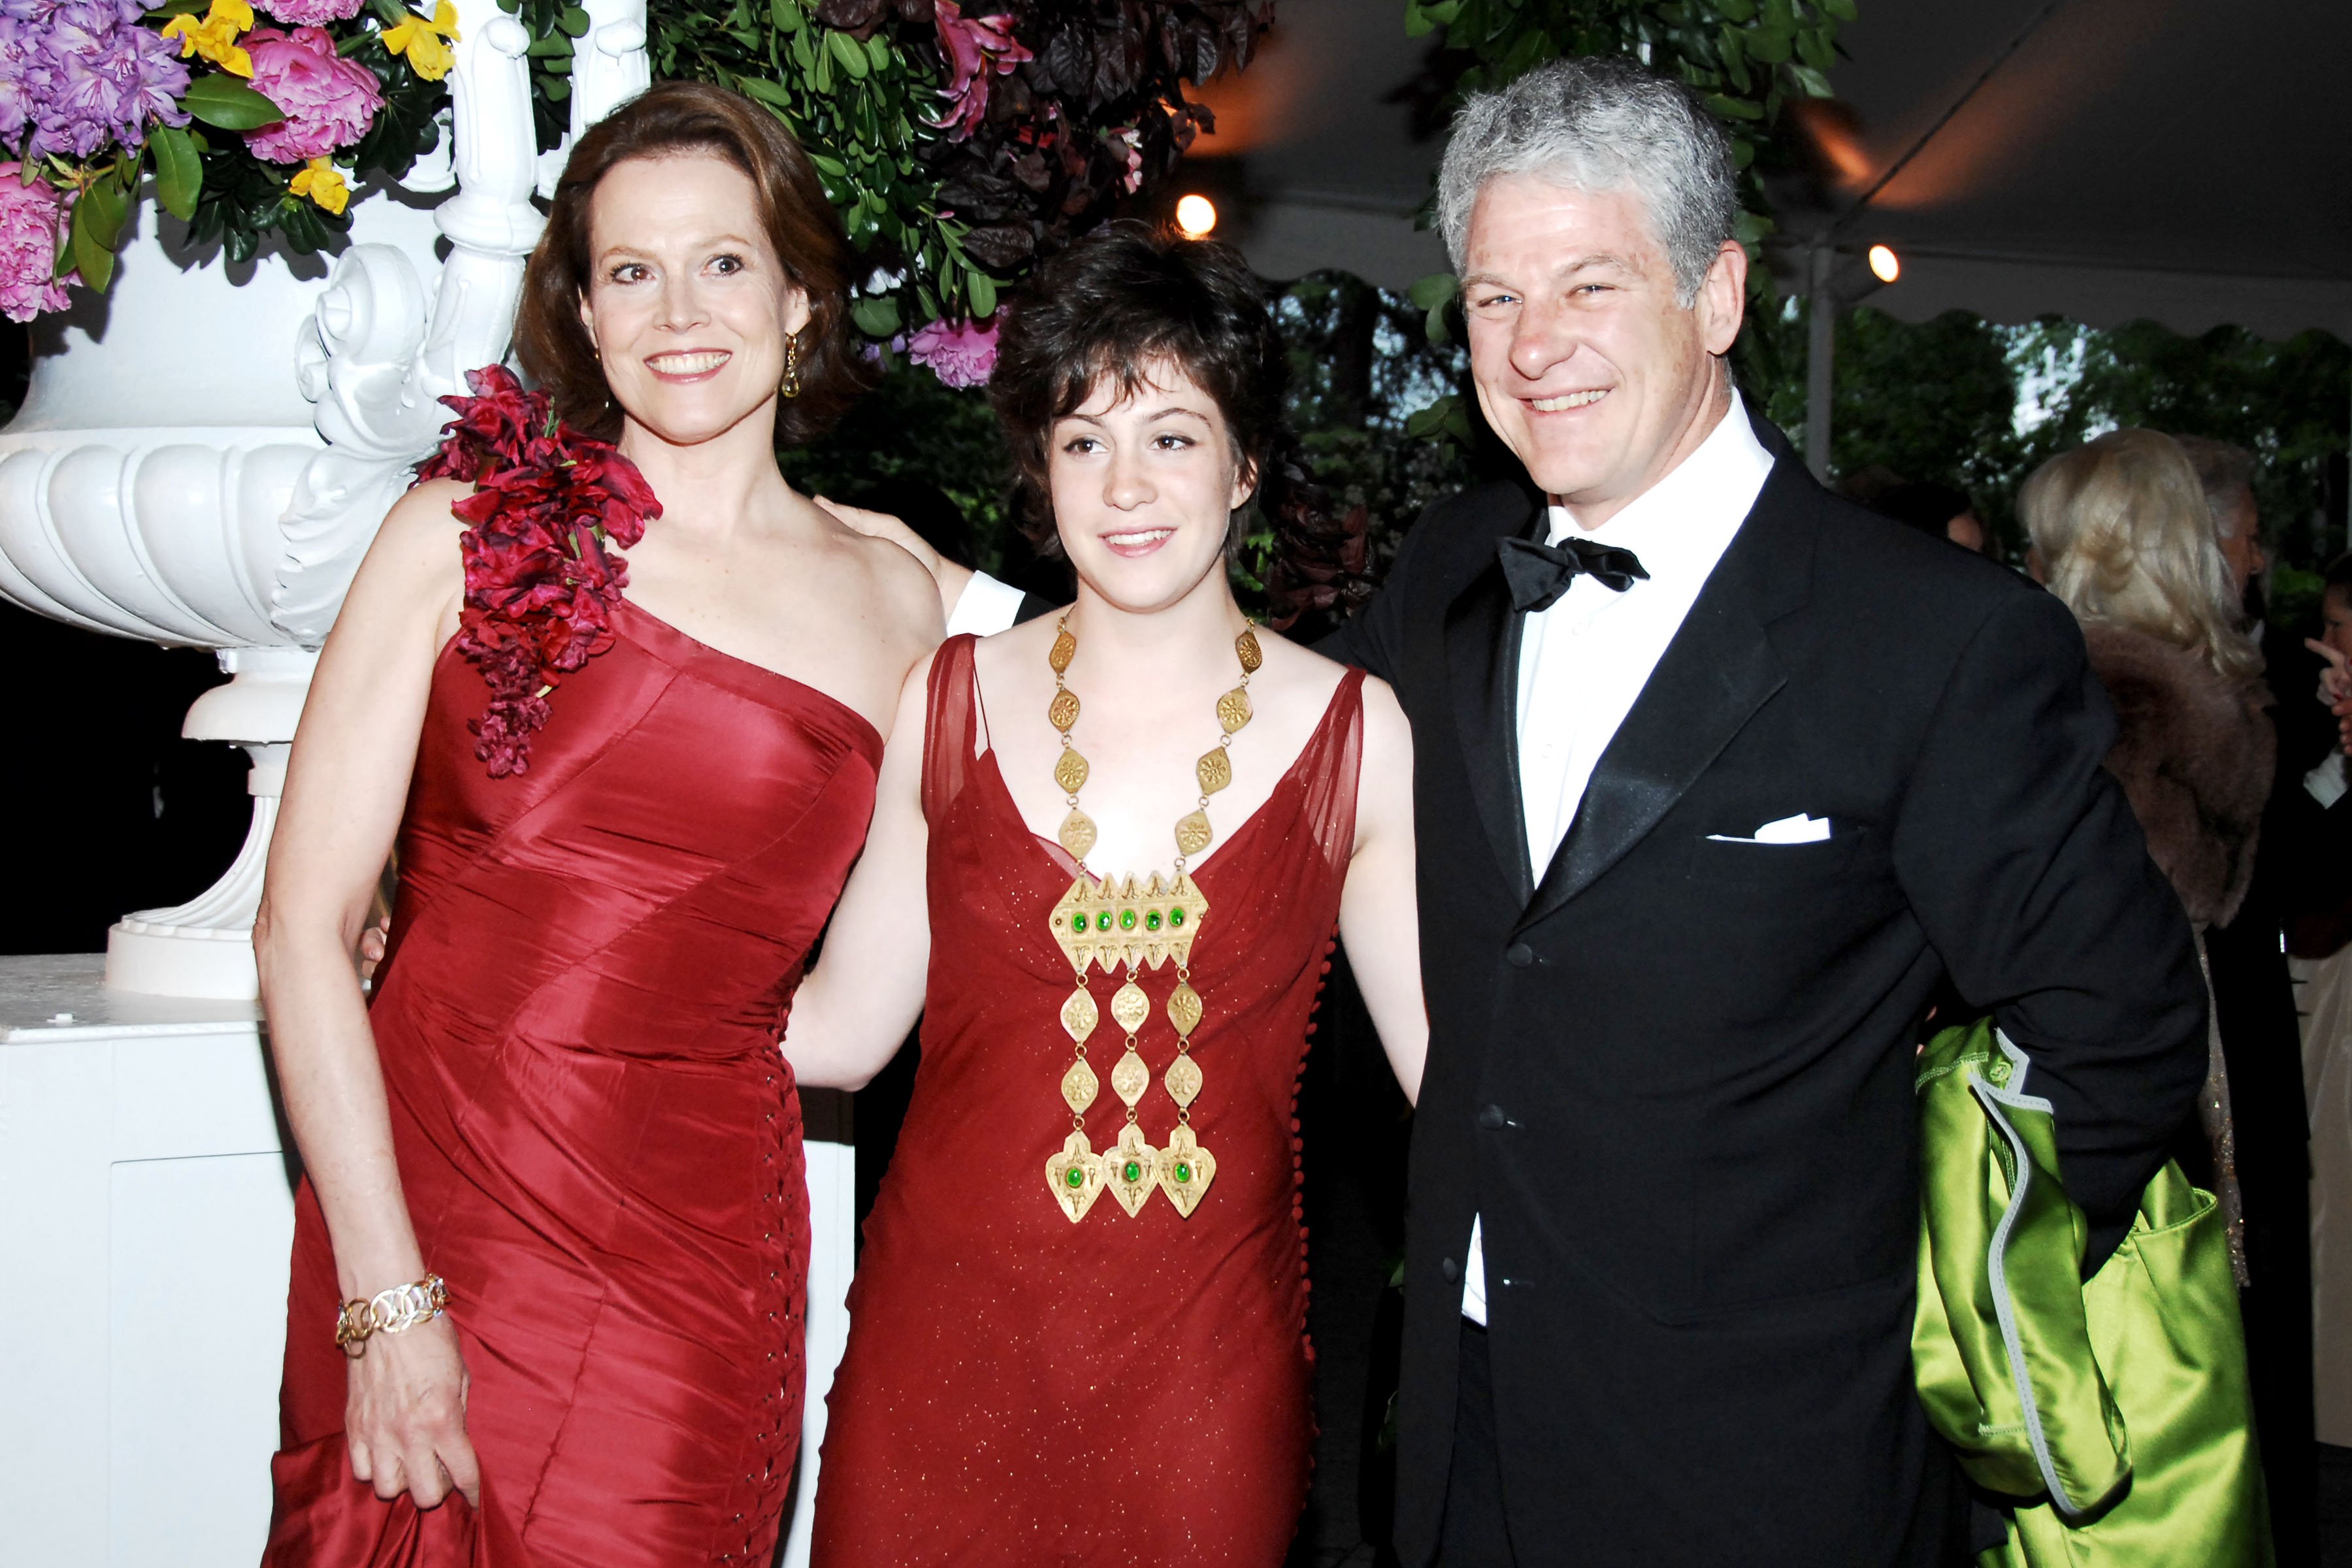  Sigourney Weaver, Charlotte Simpson and Jim Simpson attend THE NEW YORK BOTANICAL GARDEN 2009 Conservatory Ball at The New York Botanical Garden on June 4, 2009 in New York City | Source: Getty Images